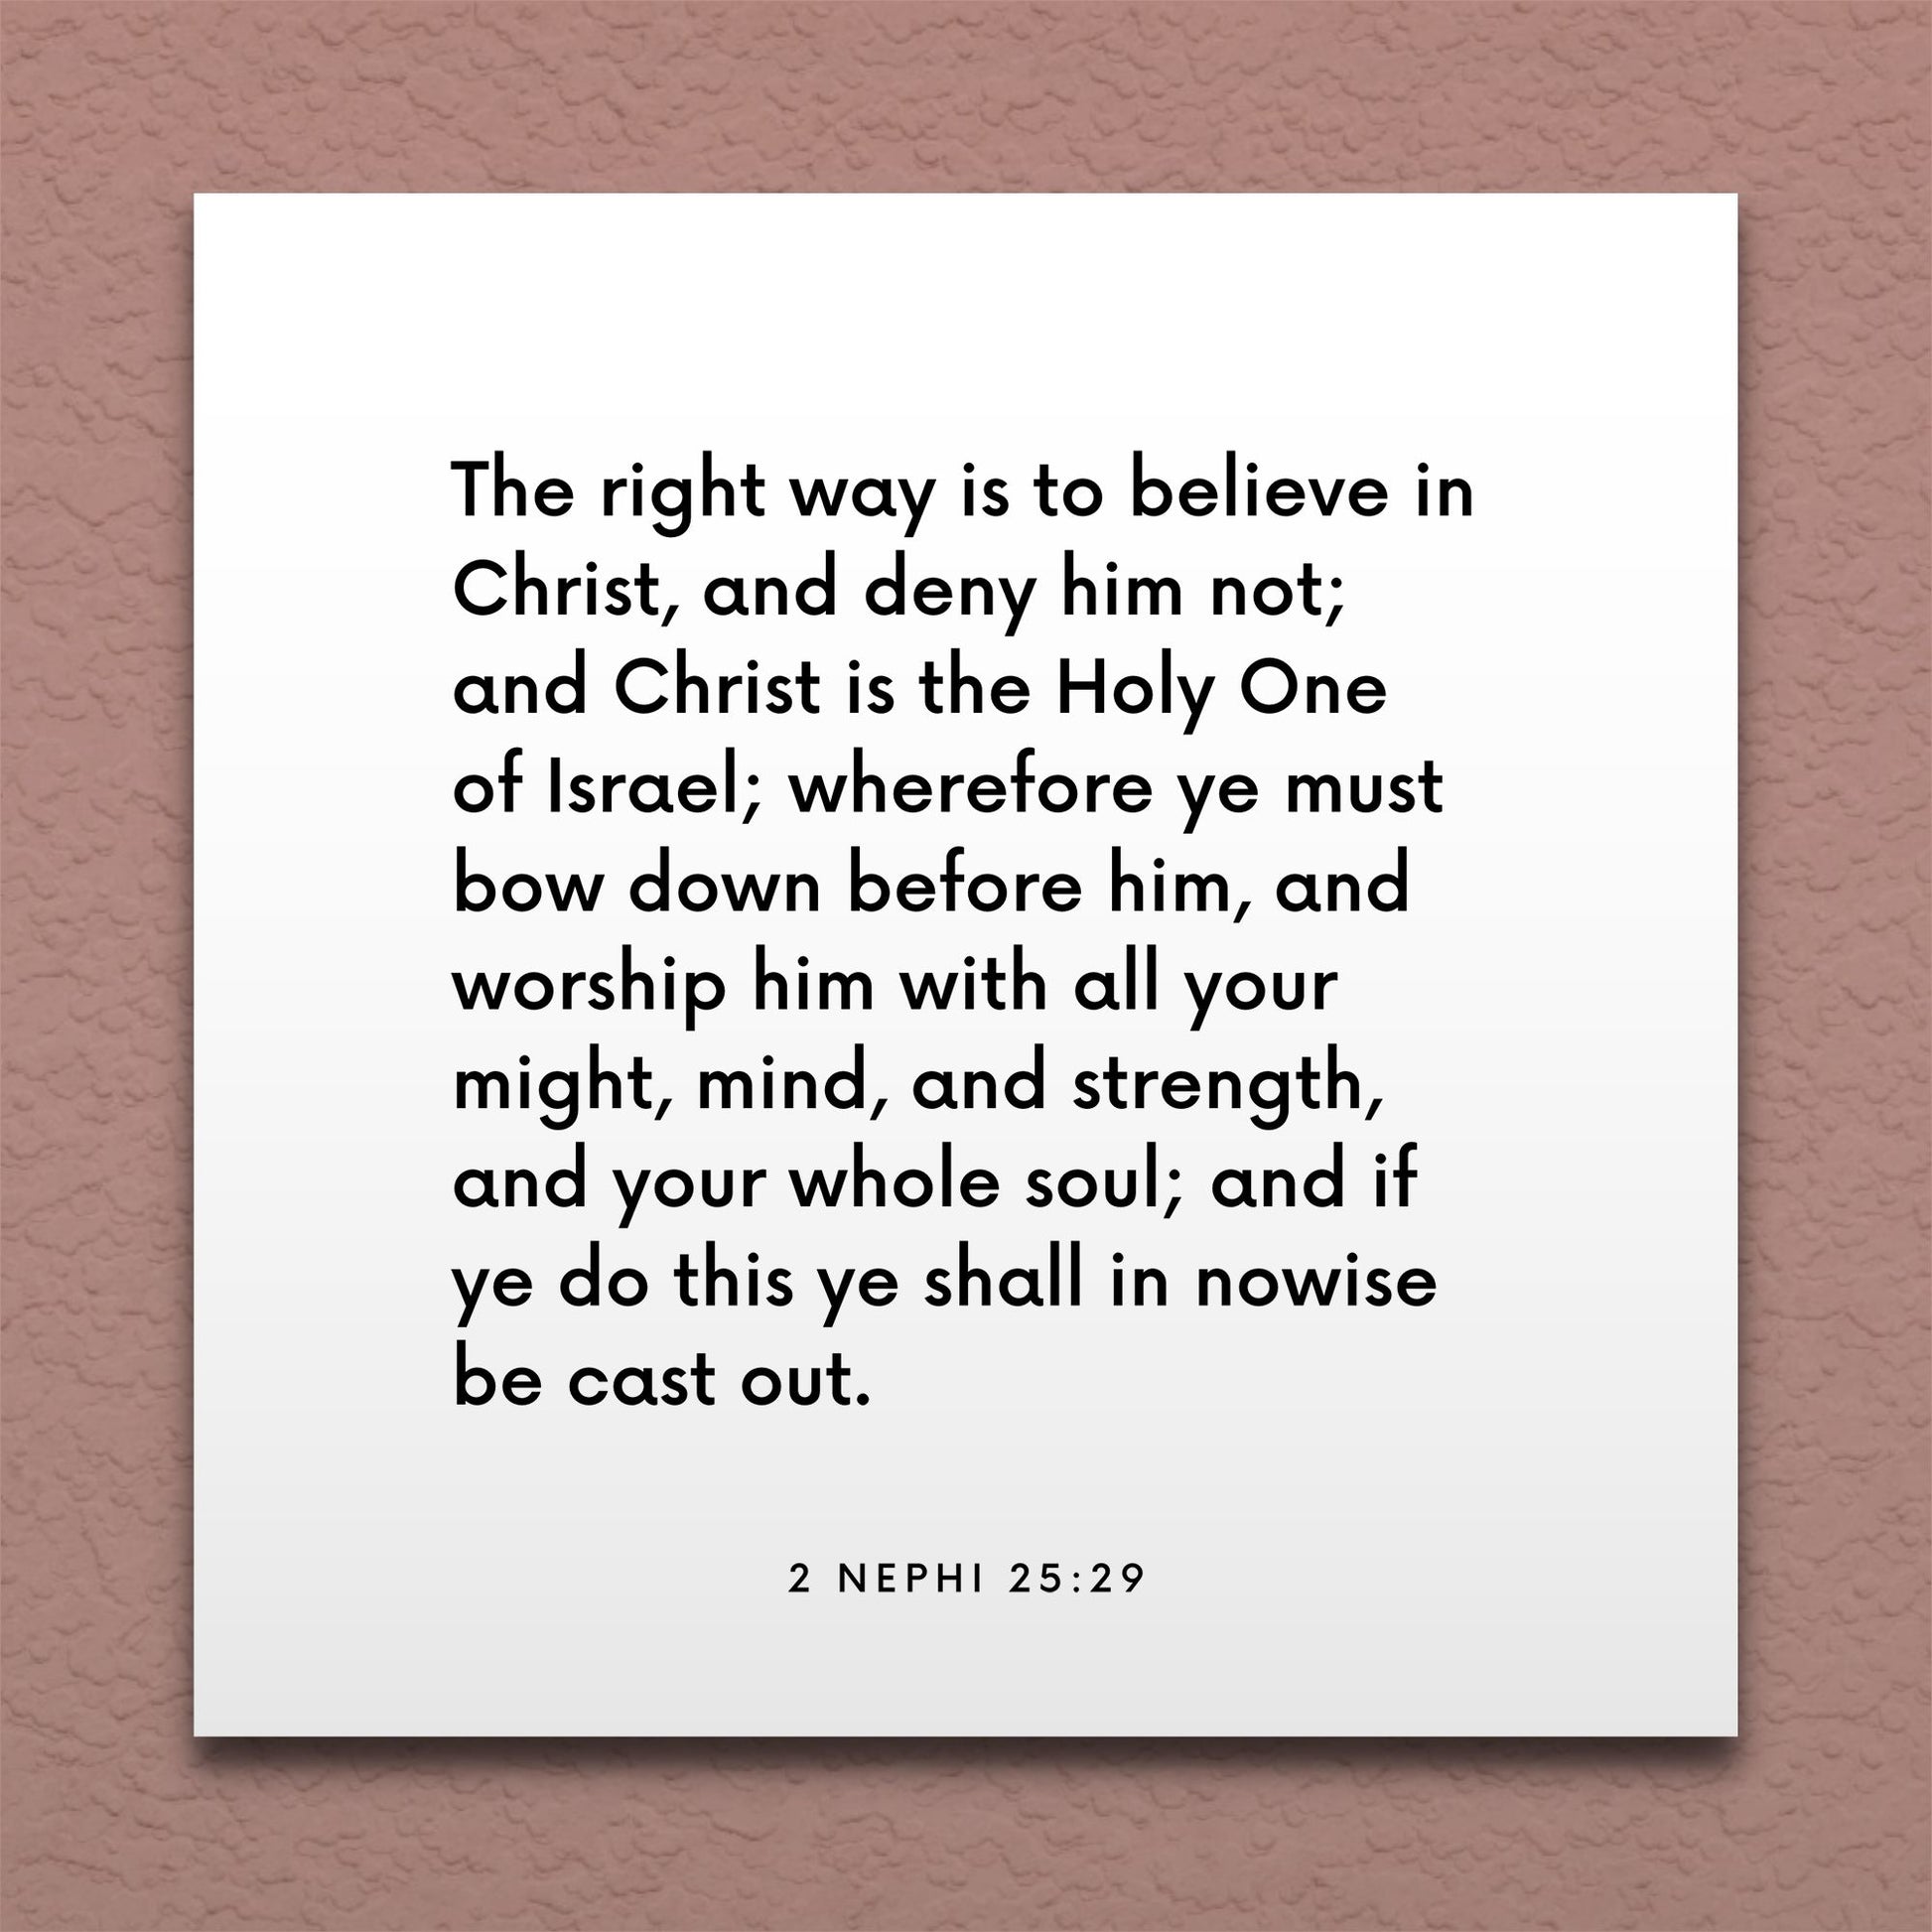 Wall-mounted scripture tile for 2 Nephi 25:29 - "The right way is to believe in Christ, and deny him not"